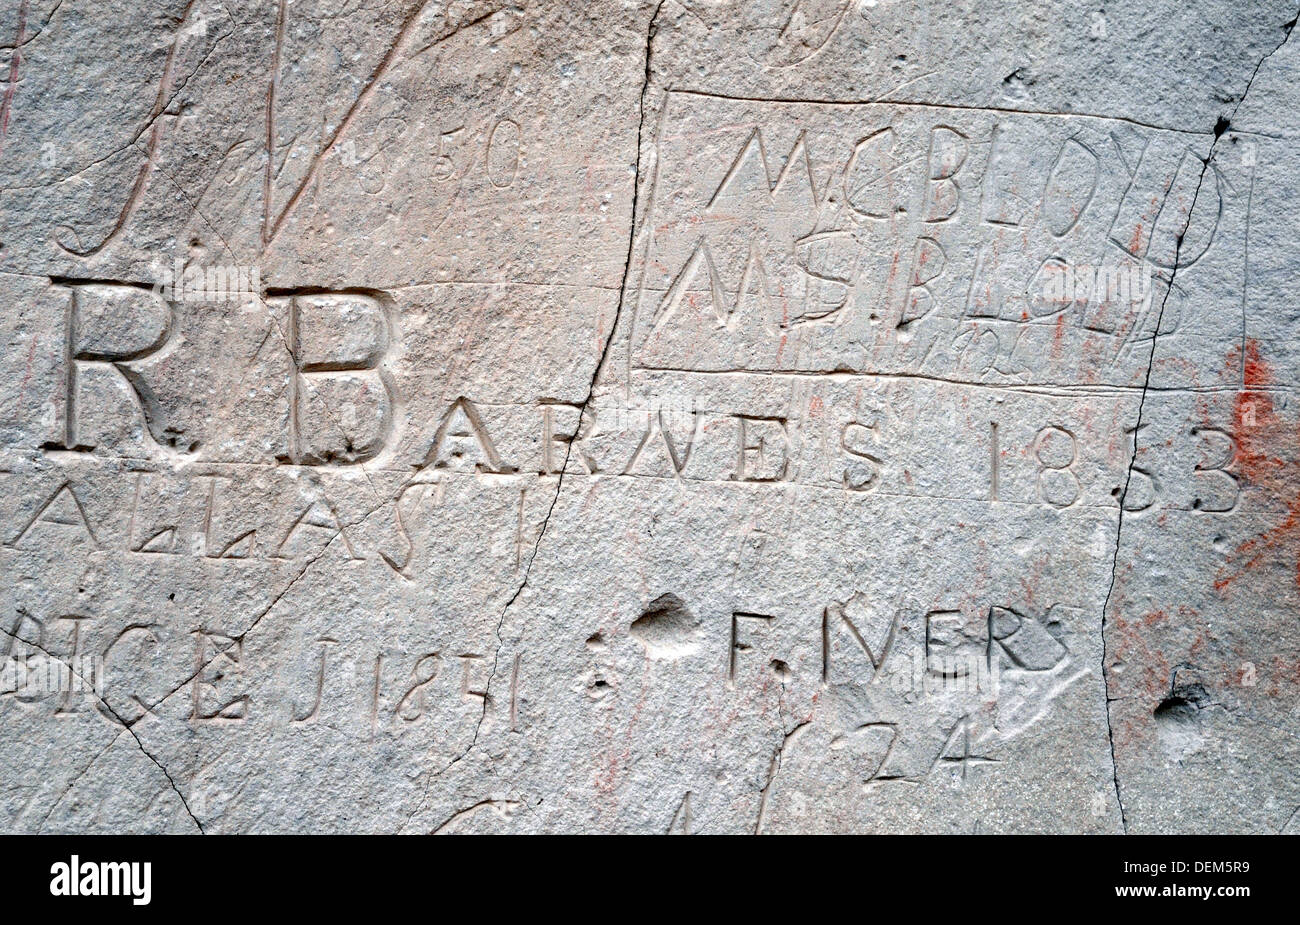 The name of an 700 carved their names hemigrant and user of the Oregon Trail carved into the soft sandstone at Register Cliff, near Guernsey, Wyoming. Stock Photo